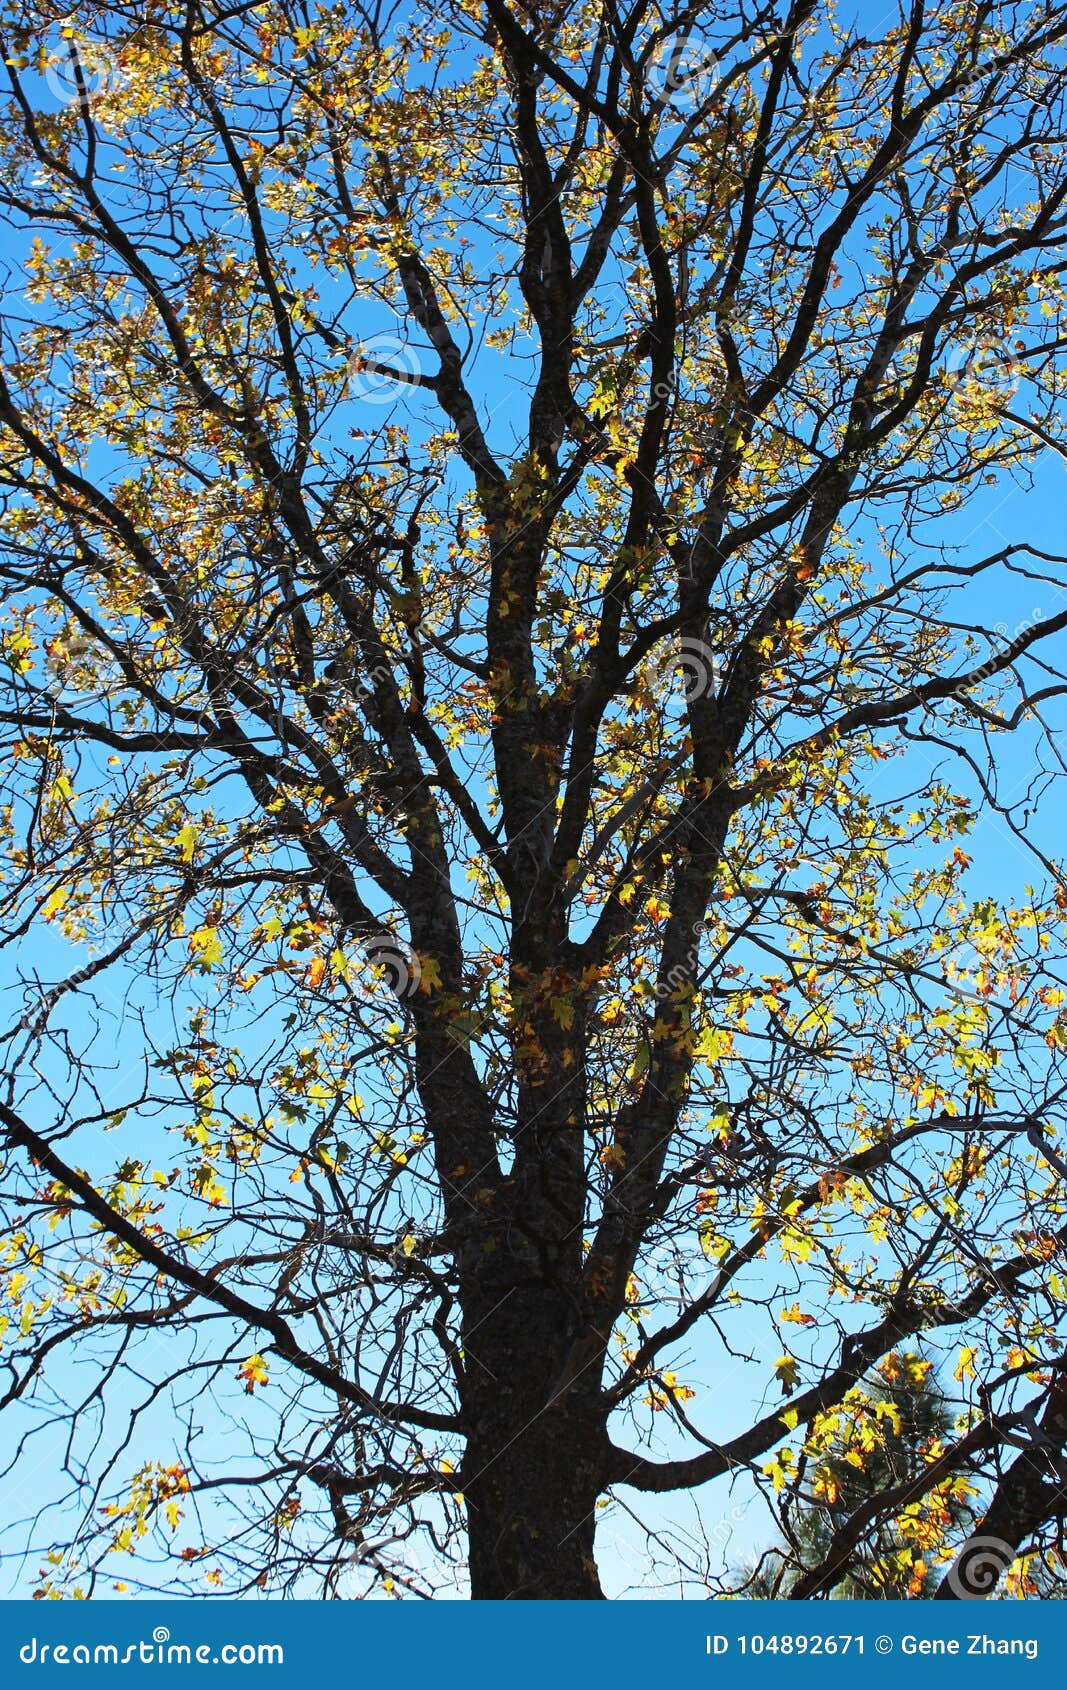 oak tree with yellow leaves in fall